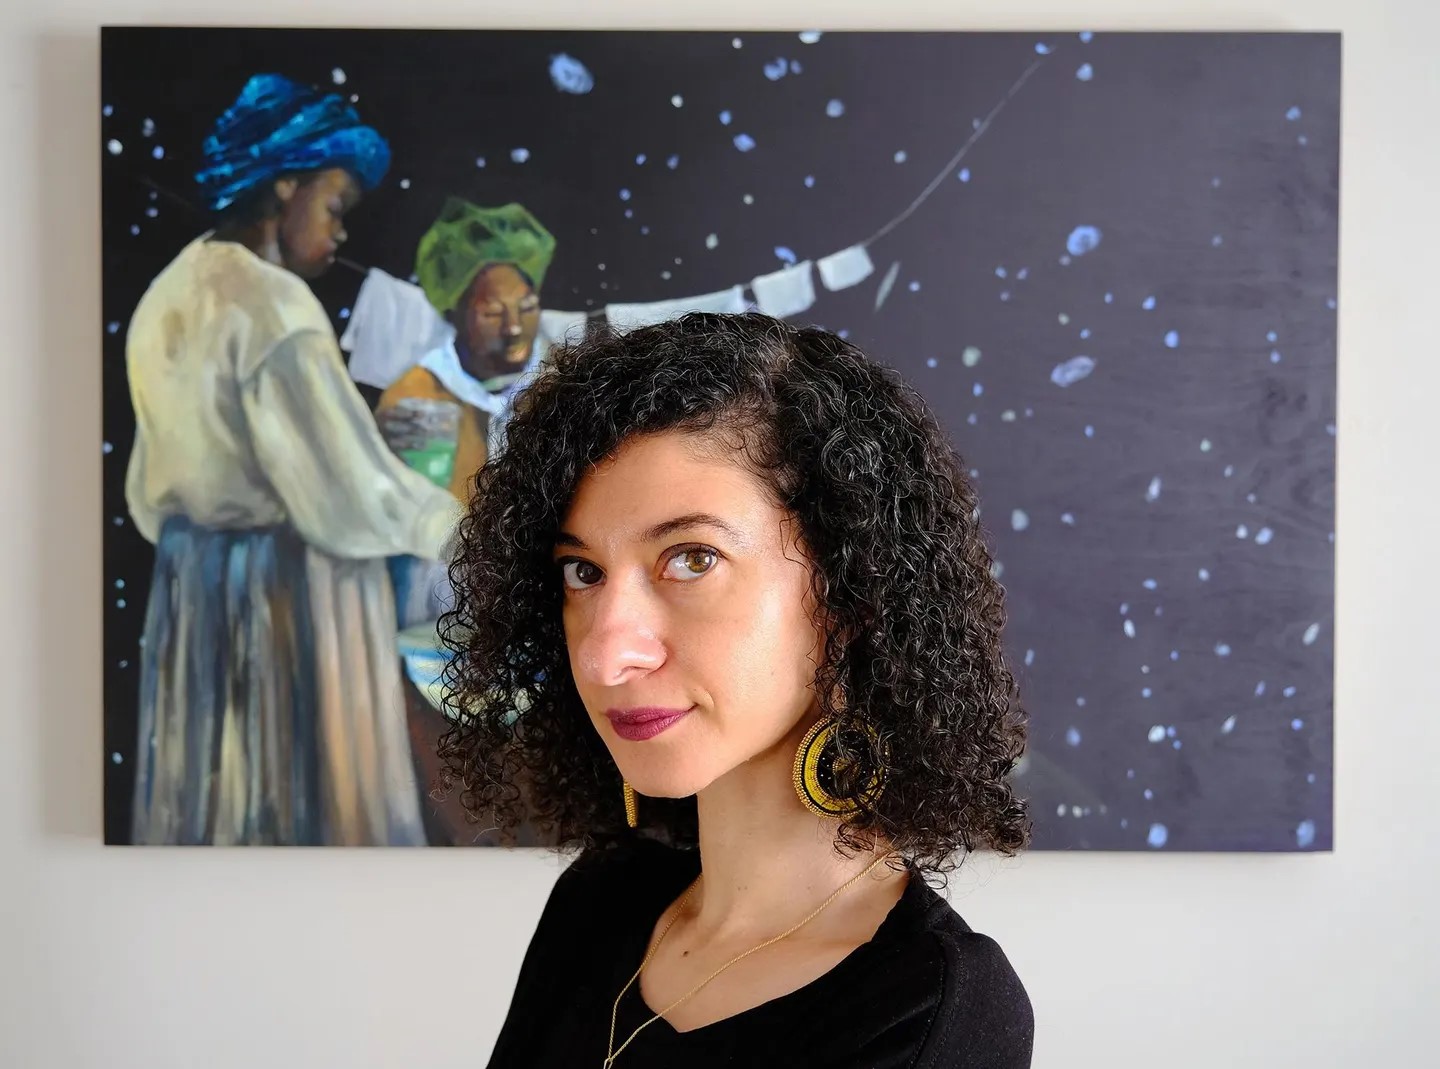 Headshot of Chanda Prescot-Weinstein looking aslant at the camera in front of a painting of black women and stars.